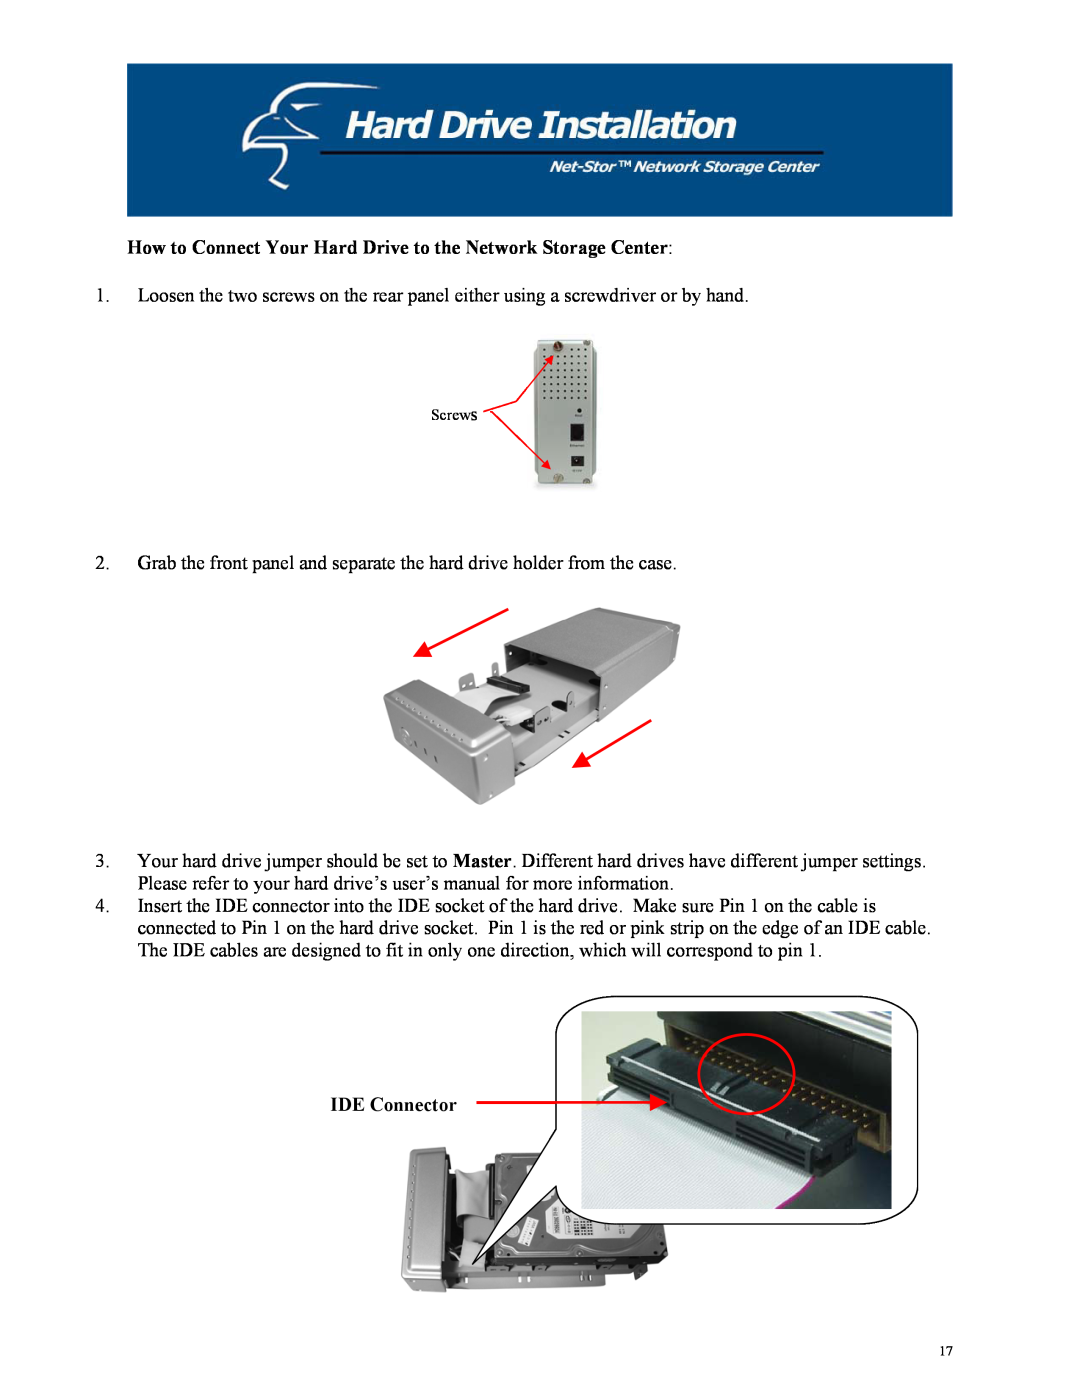 Hawking Technology HNAS1 manual How to Connect Your Hard Drive to the Network Storage Center, IDE Connector, Screws 